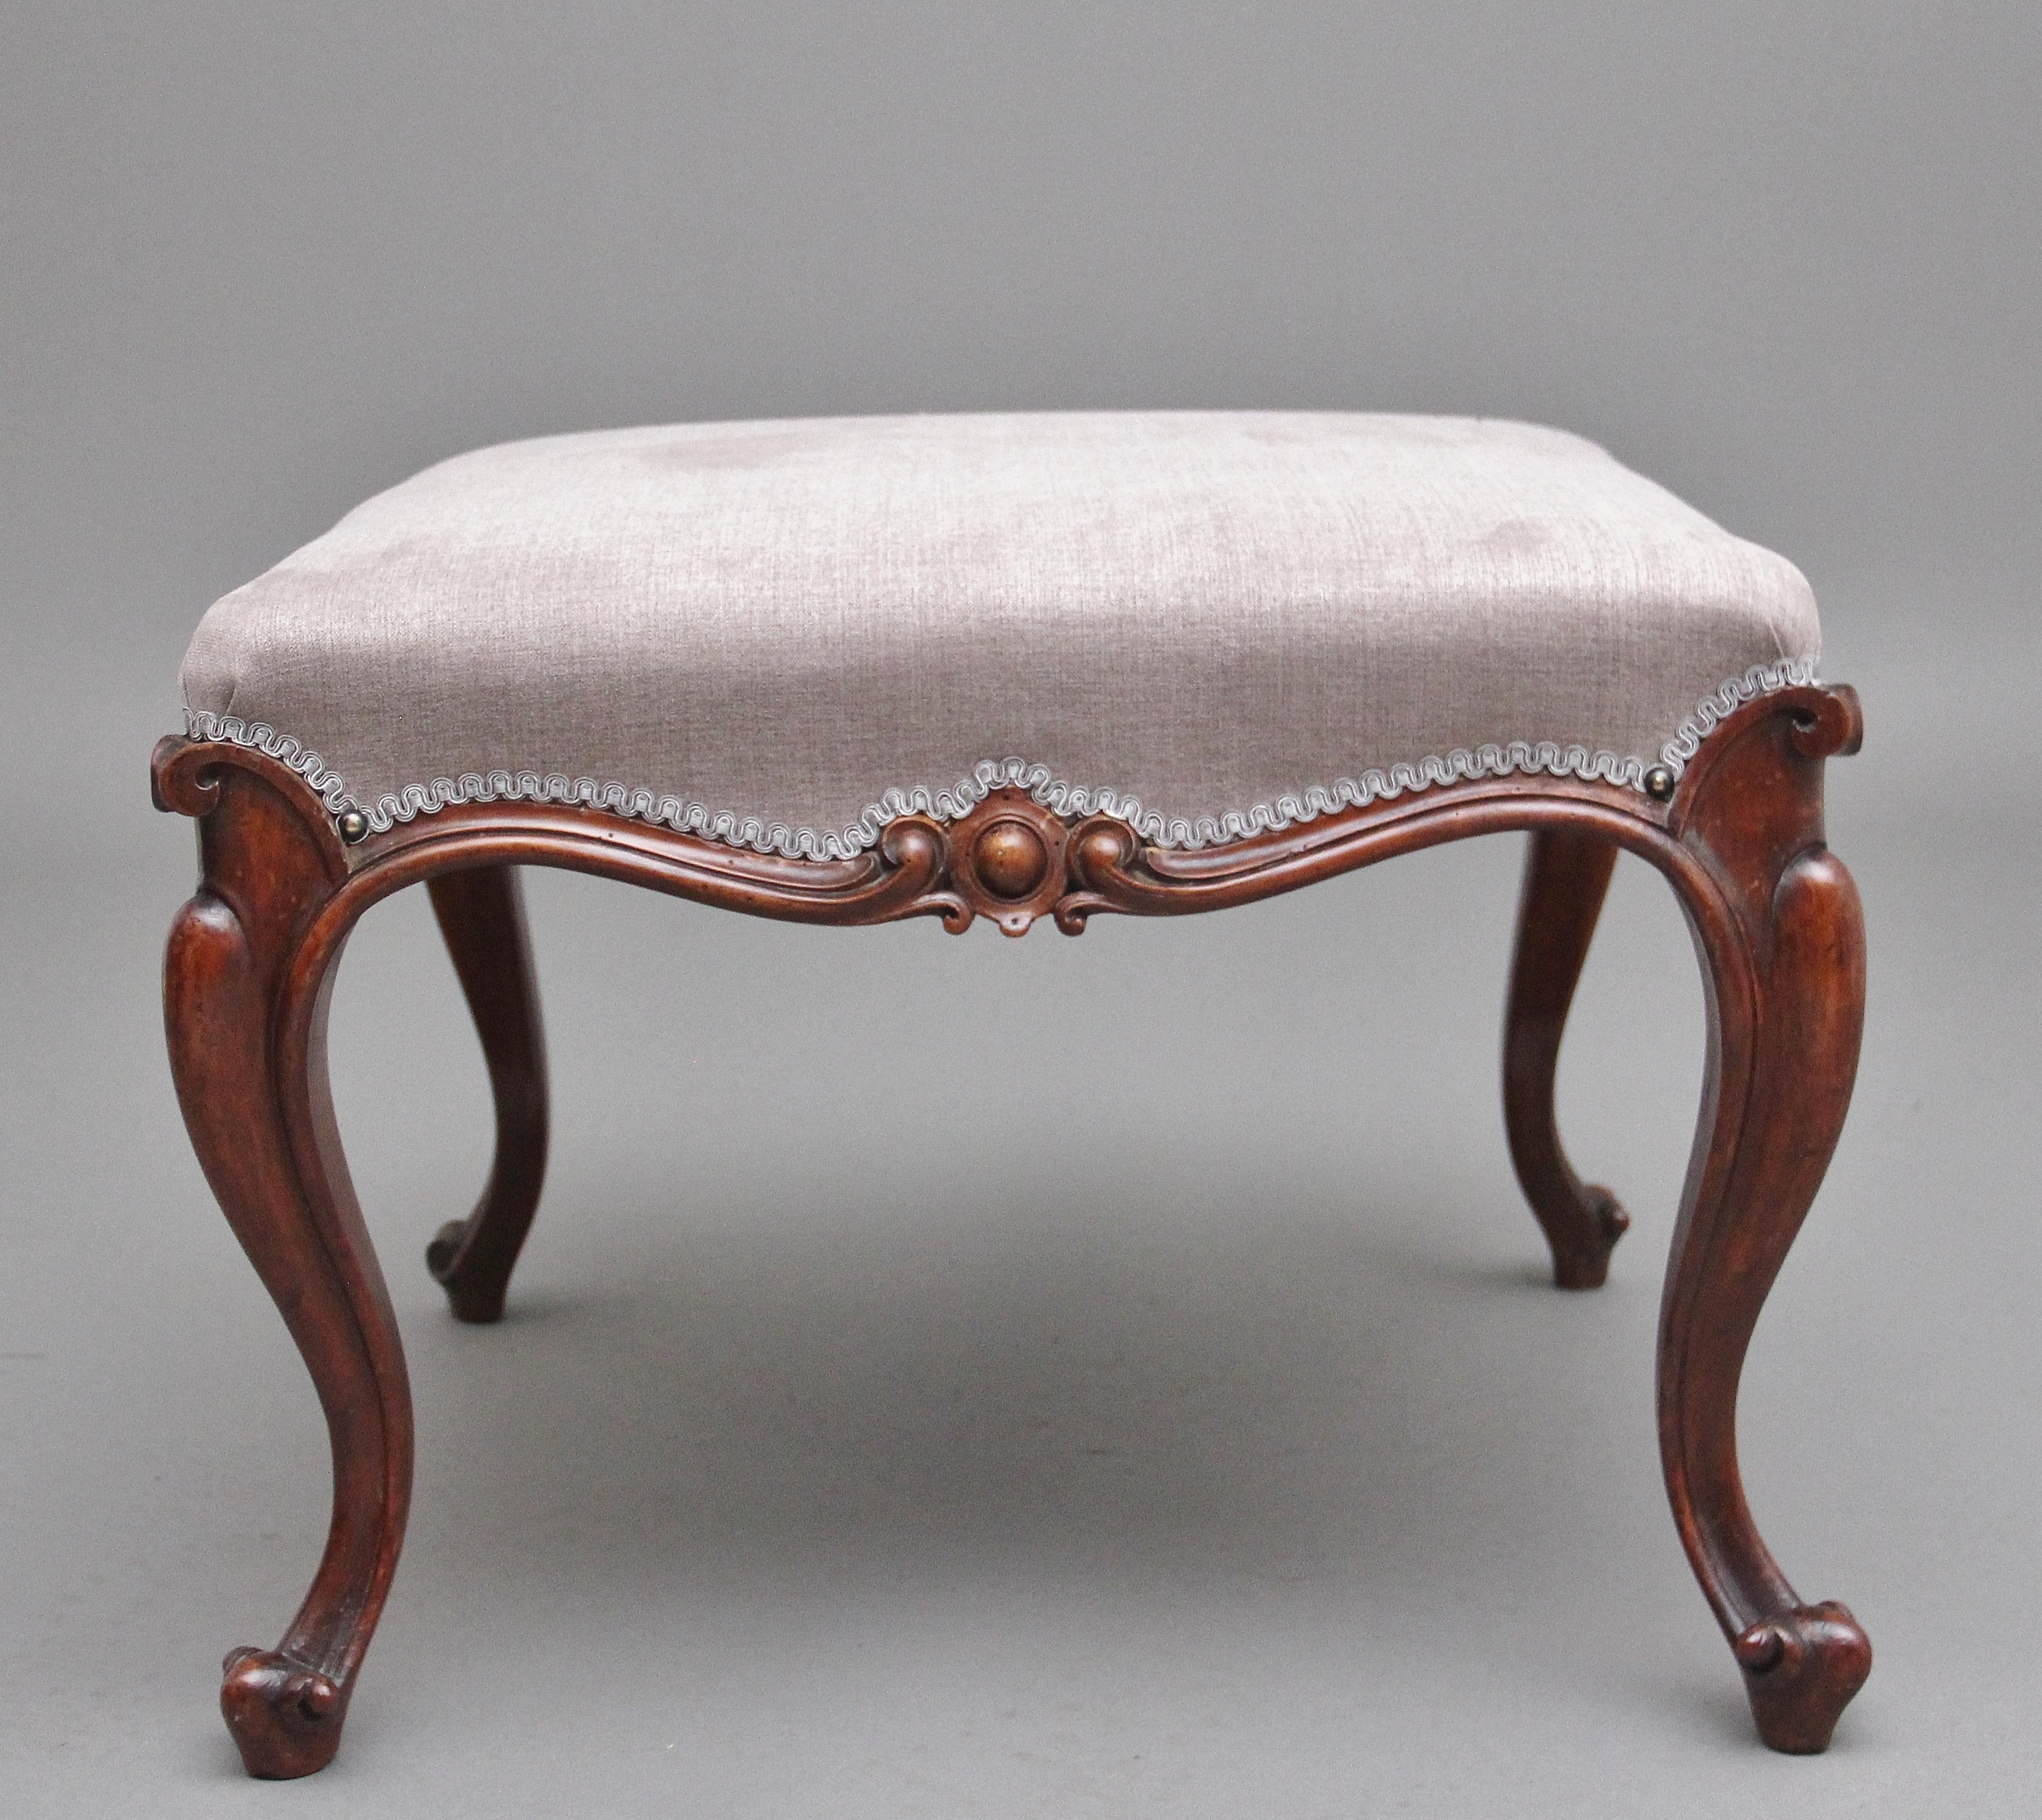 19th Century walnut stool having a recently reupholstered grey coloured stuff over seat finished with a decorative scroll trim, the foliate carved arched edge on cabriole legs. Circa 1860.